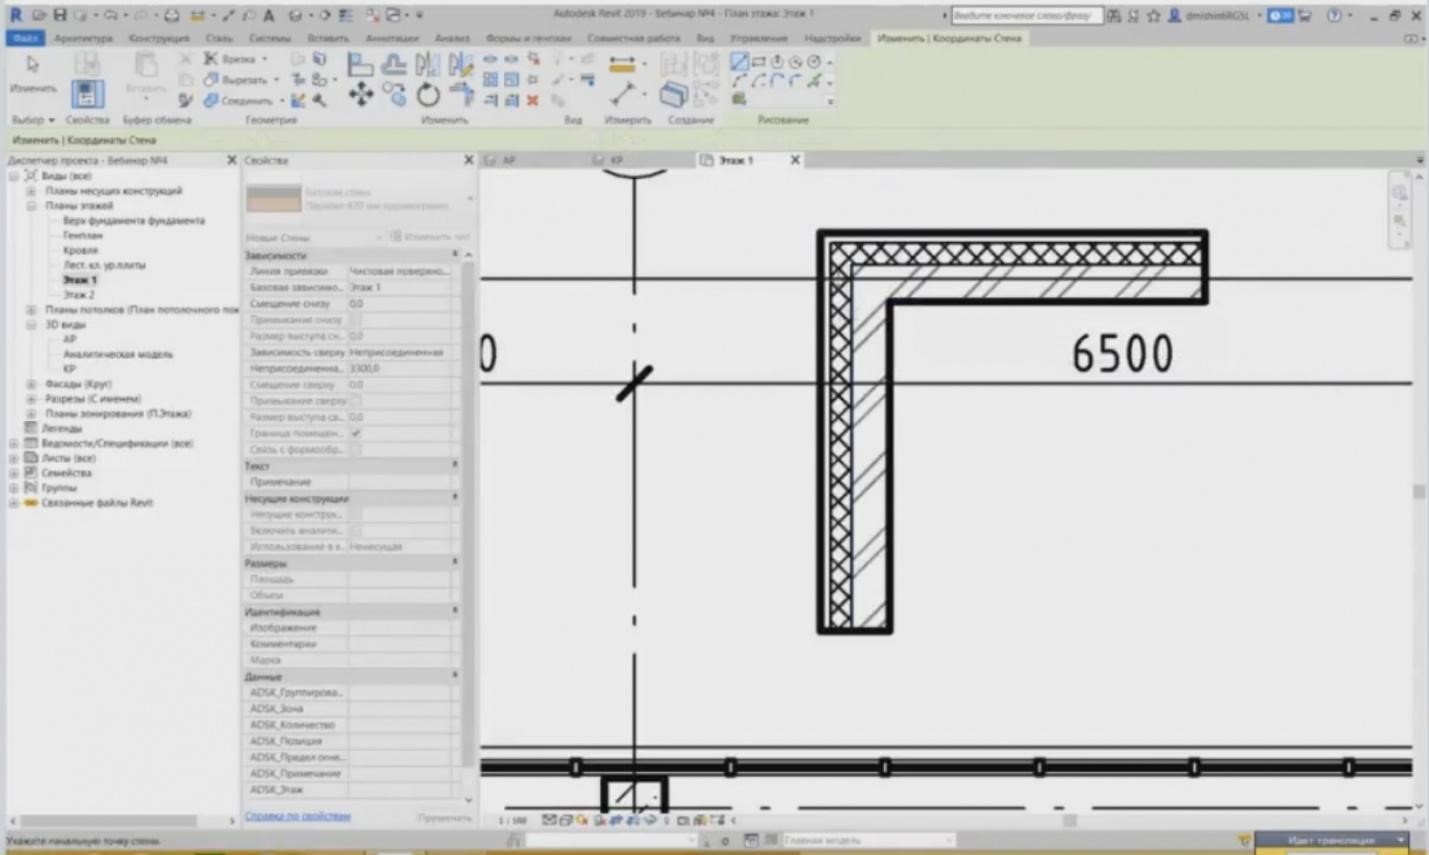 BIM DESIGN IN REVIT. CREATING ARCHITECTURAL AND STRUCTURAL ELEMENTS. PAGE 2-10